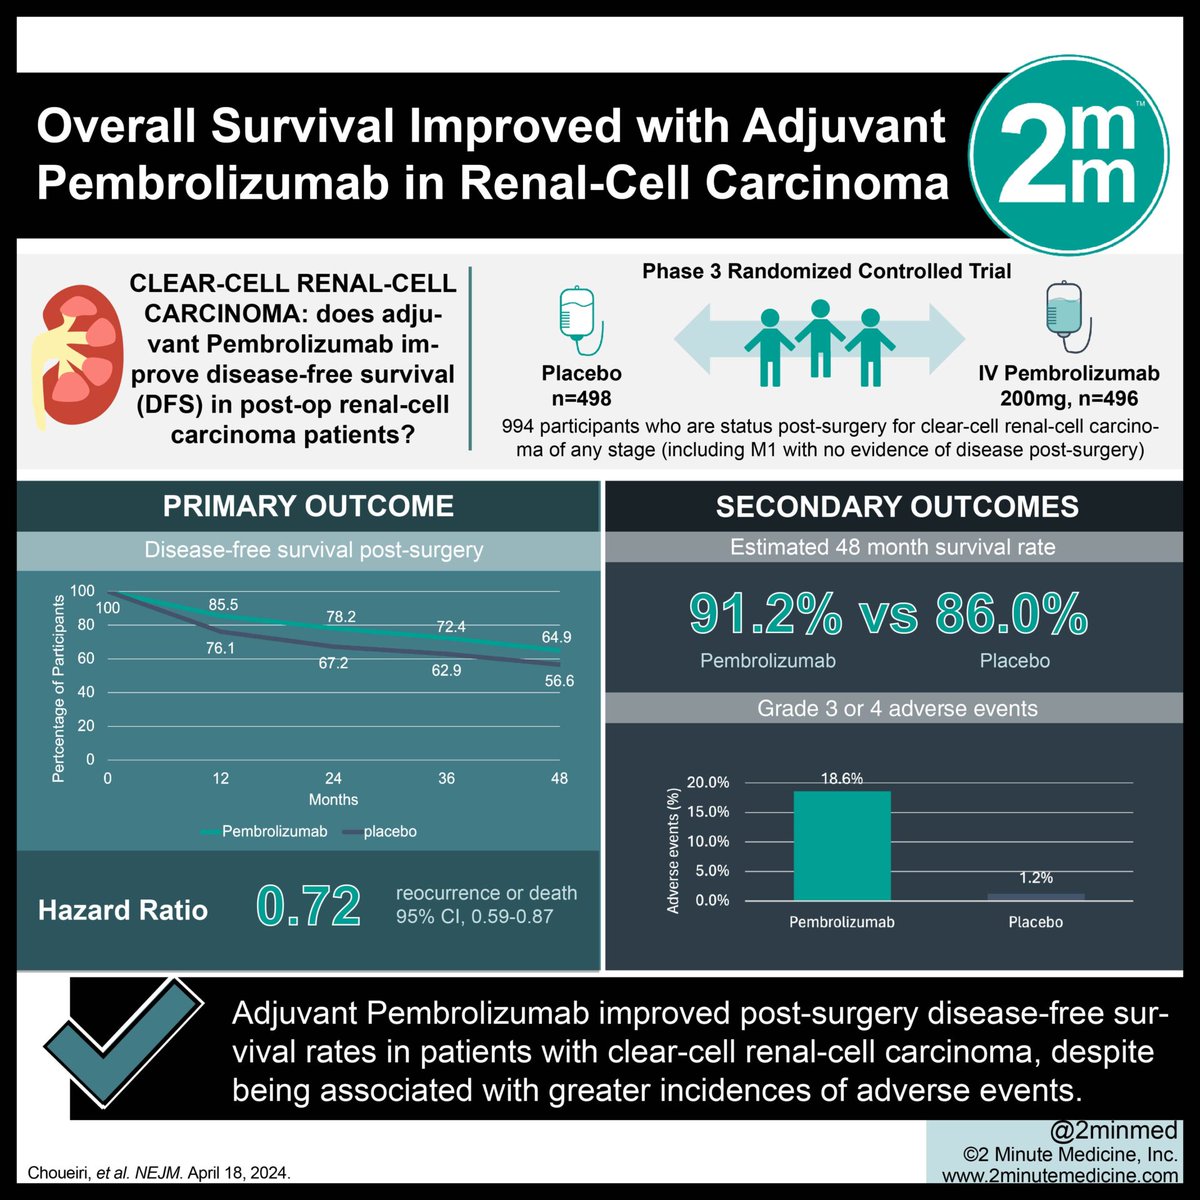 #VisualAbstract: Overall Survival Improved with Adjuvant Pembrolizumab in Renal-Cell Carcinoma dlvr.it/T6MnKL #ChronicDisease #StudyGraphics